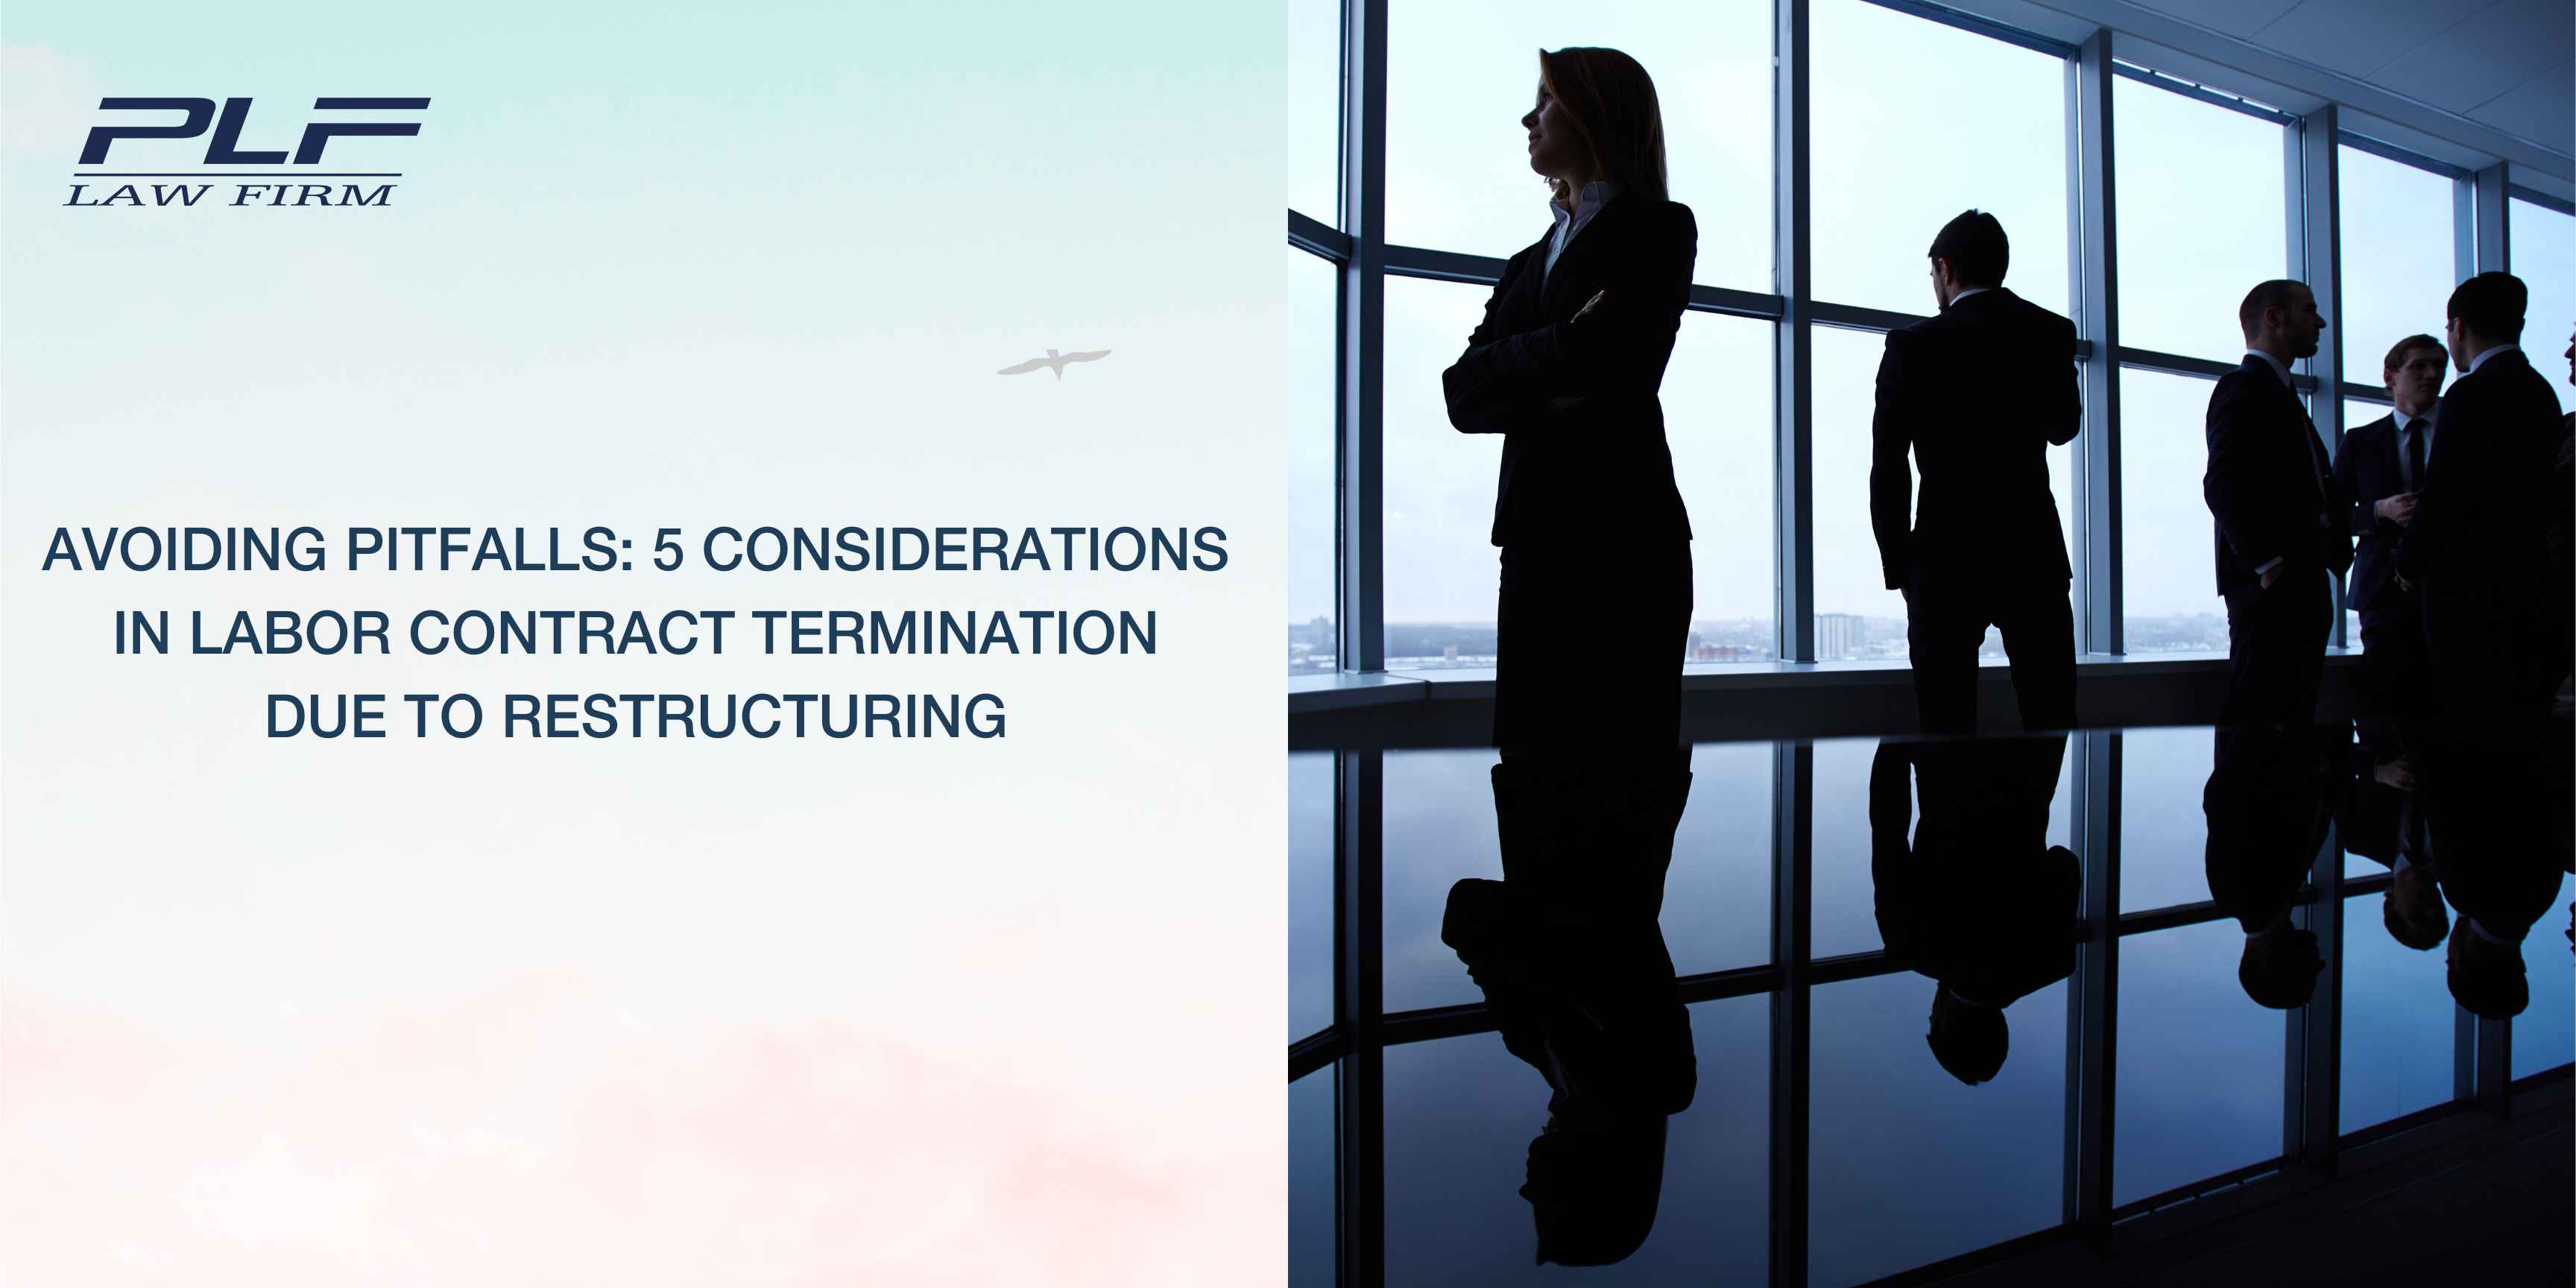 Plf Avoiding Pitfalls 5 Considerations In Labor Contract Termination Due To Restructuring